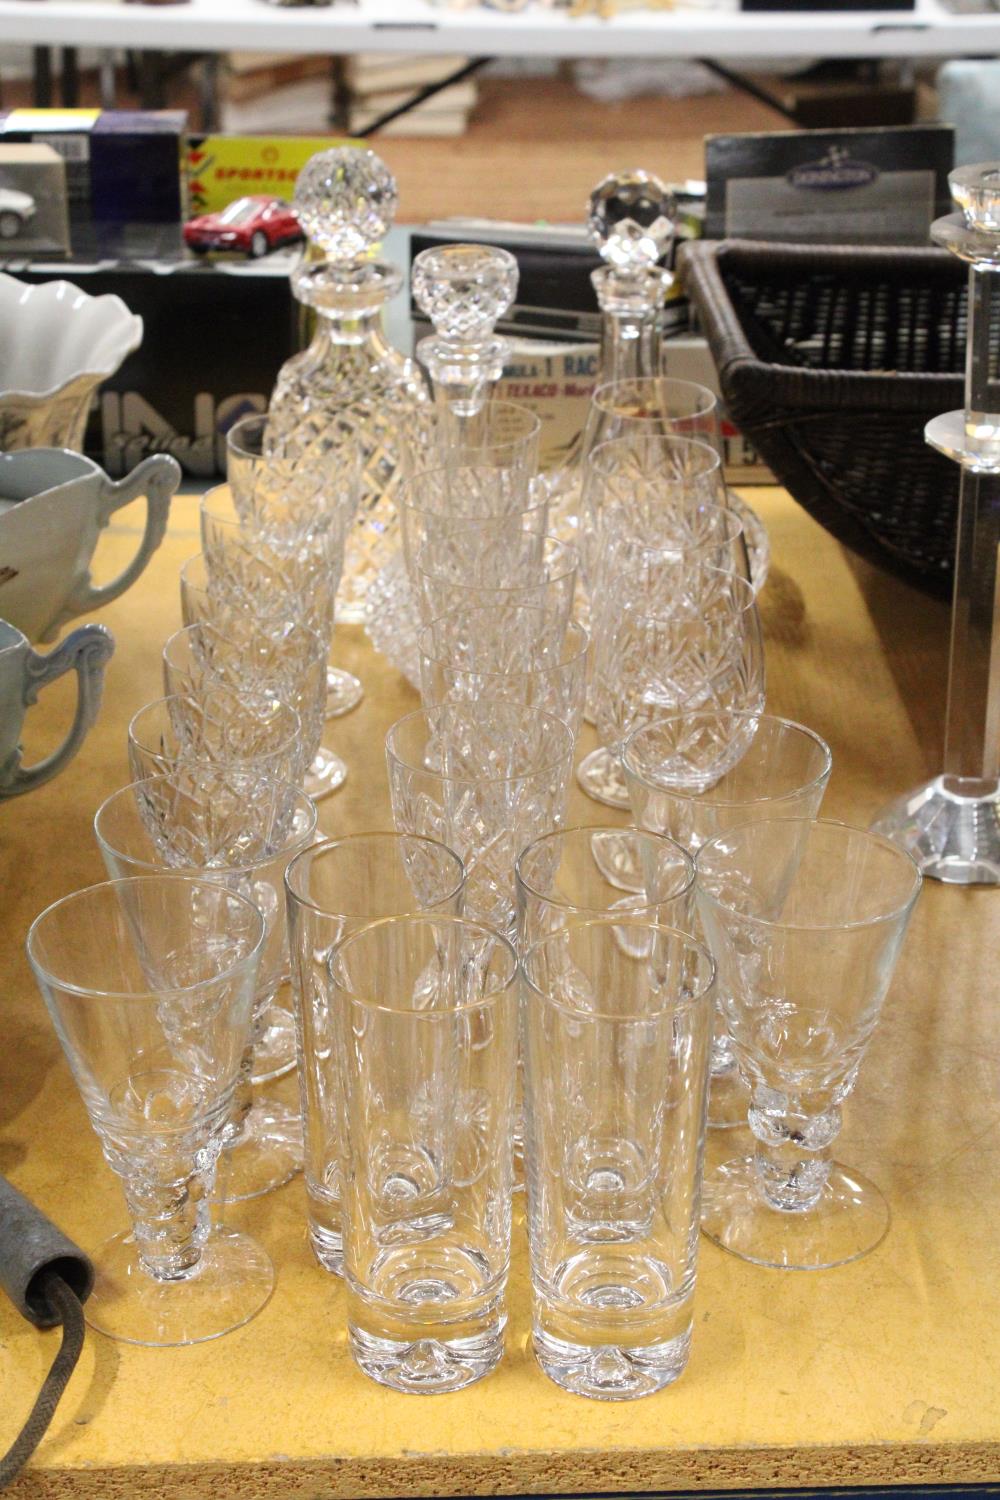 A QUANTITY OF GLASSWARE TO INCLUDE DECANTERS, WINE GLASSES, TUMBLERS, ETC